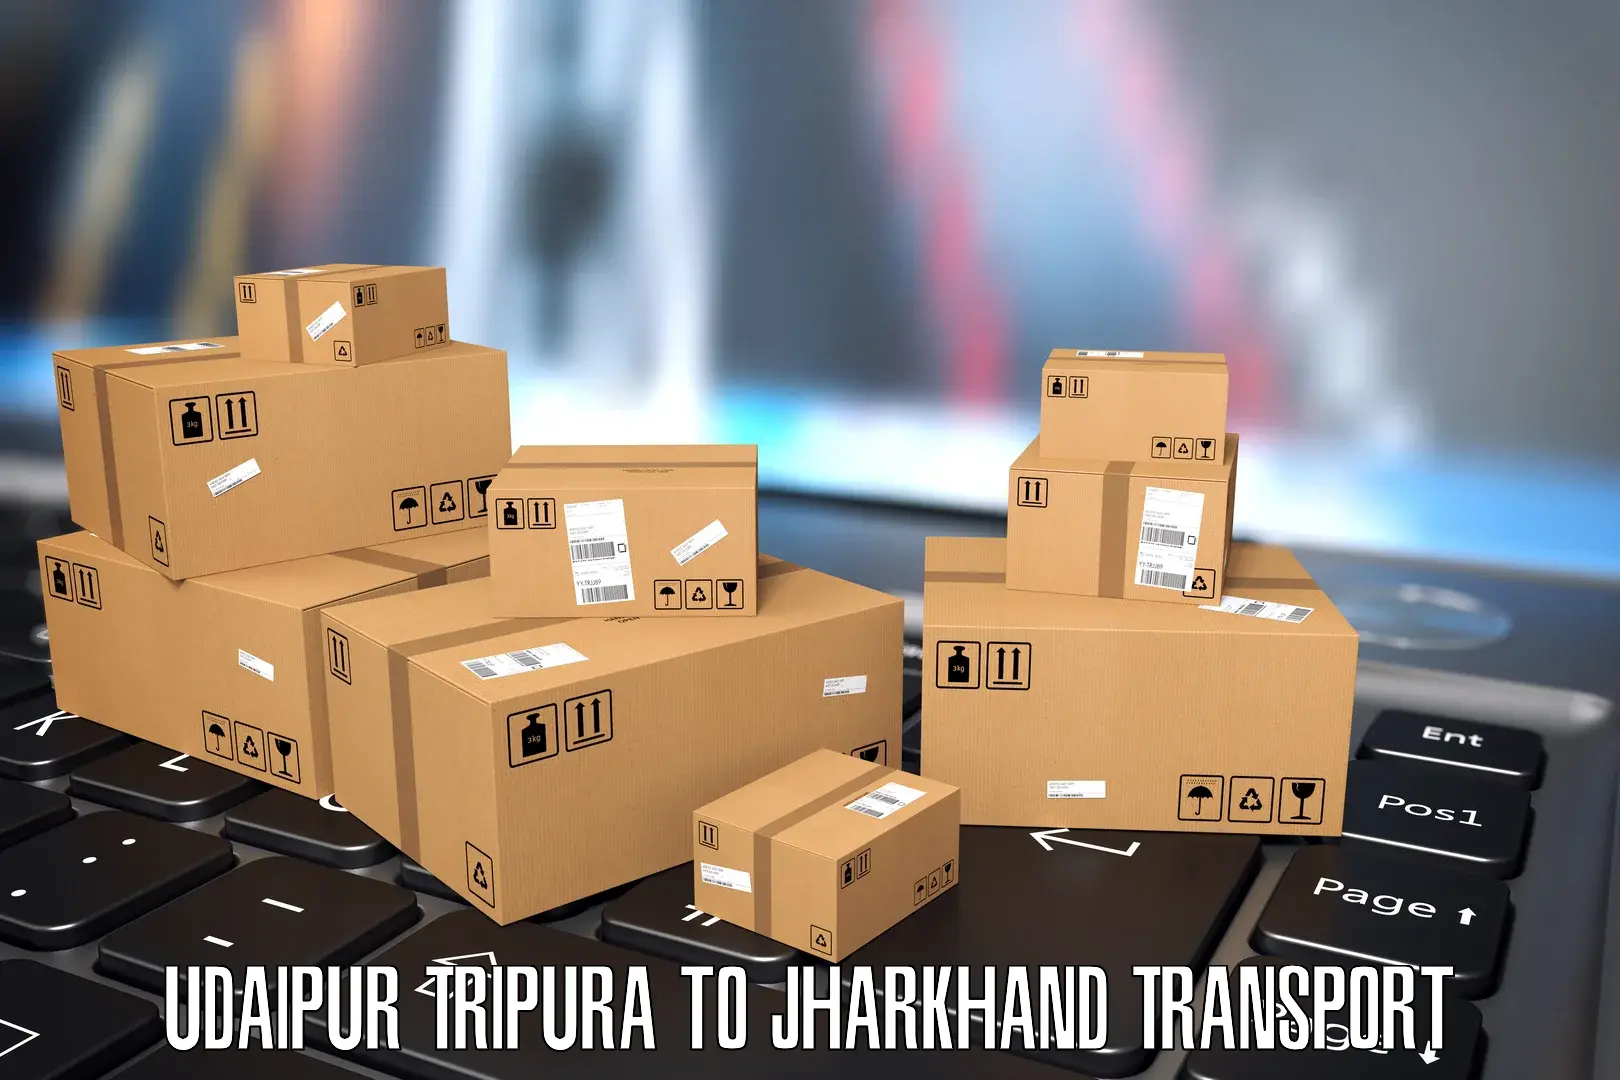 Air cargo transport services Udaipur Tripura to Jharkhand